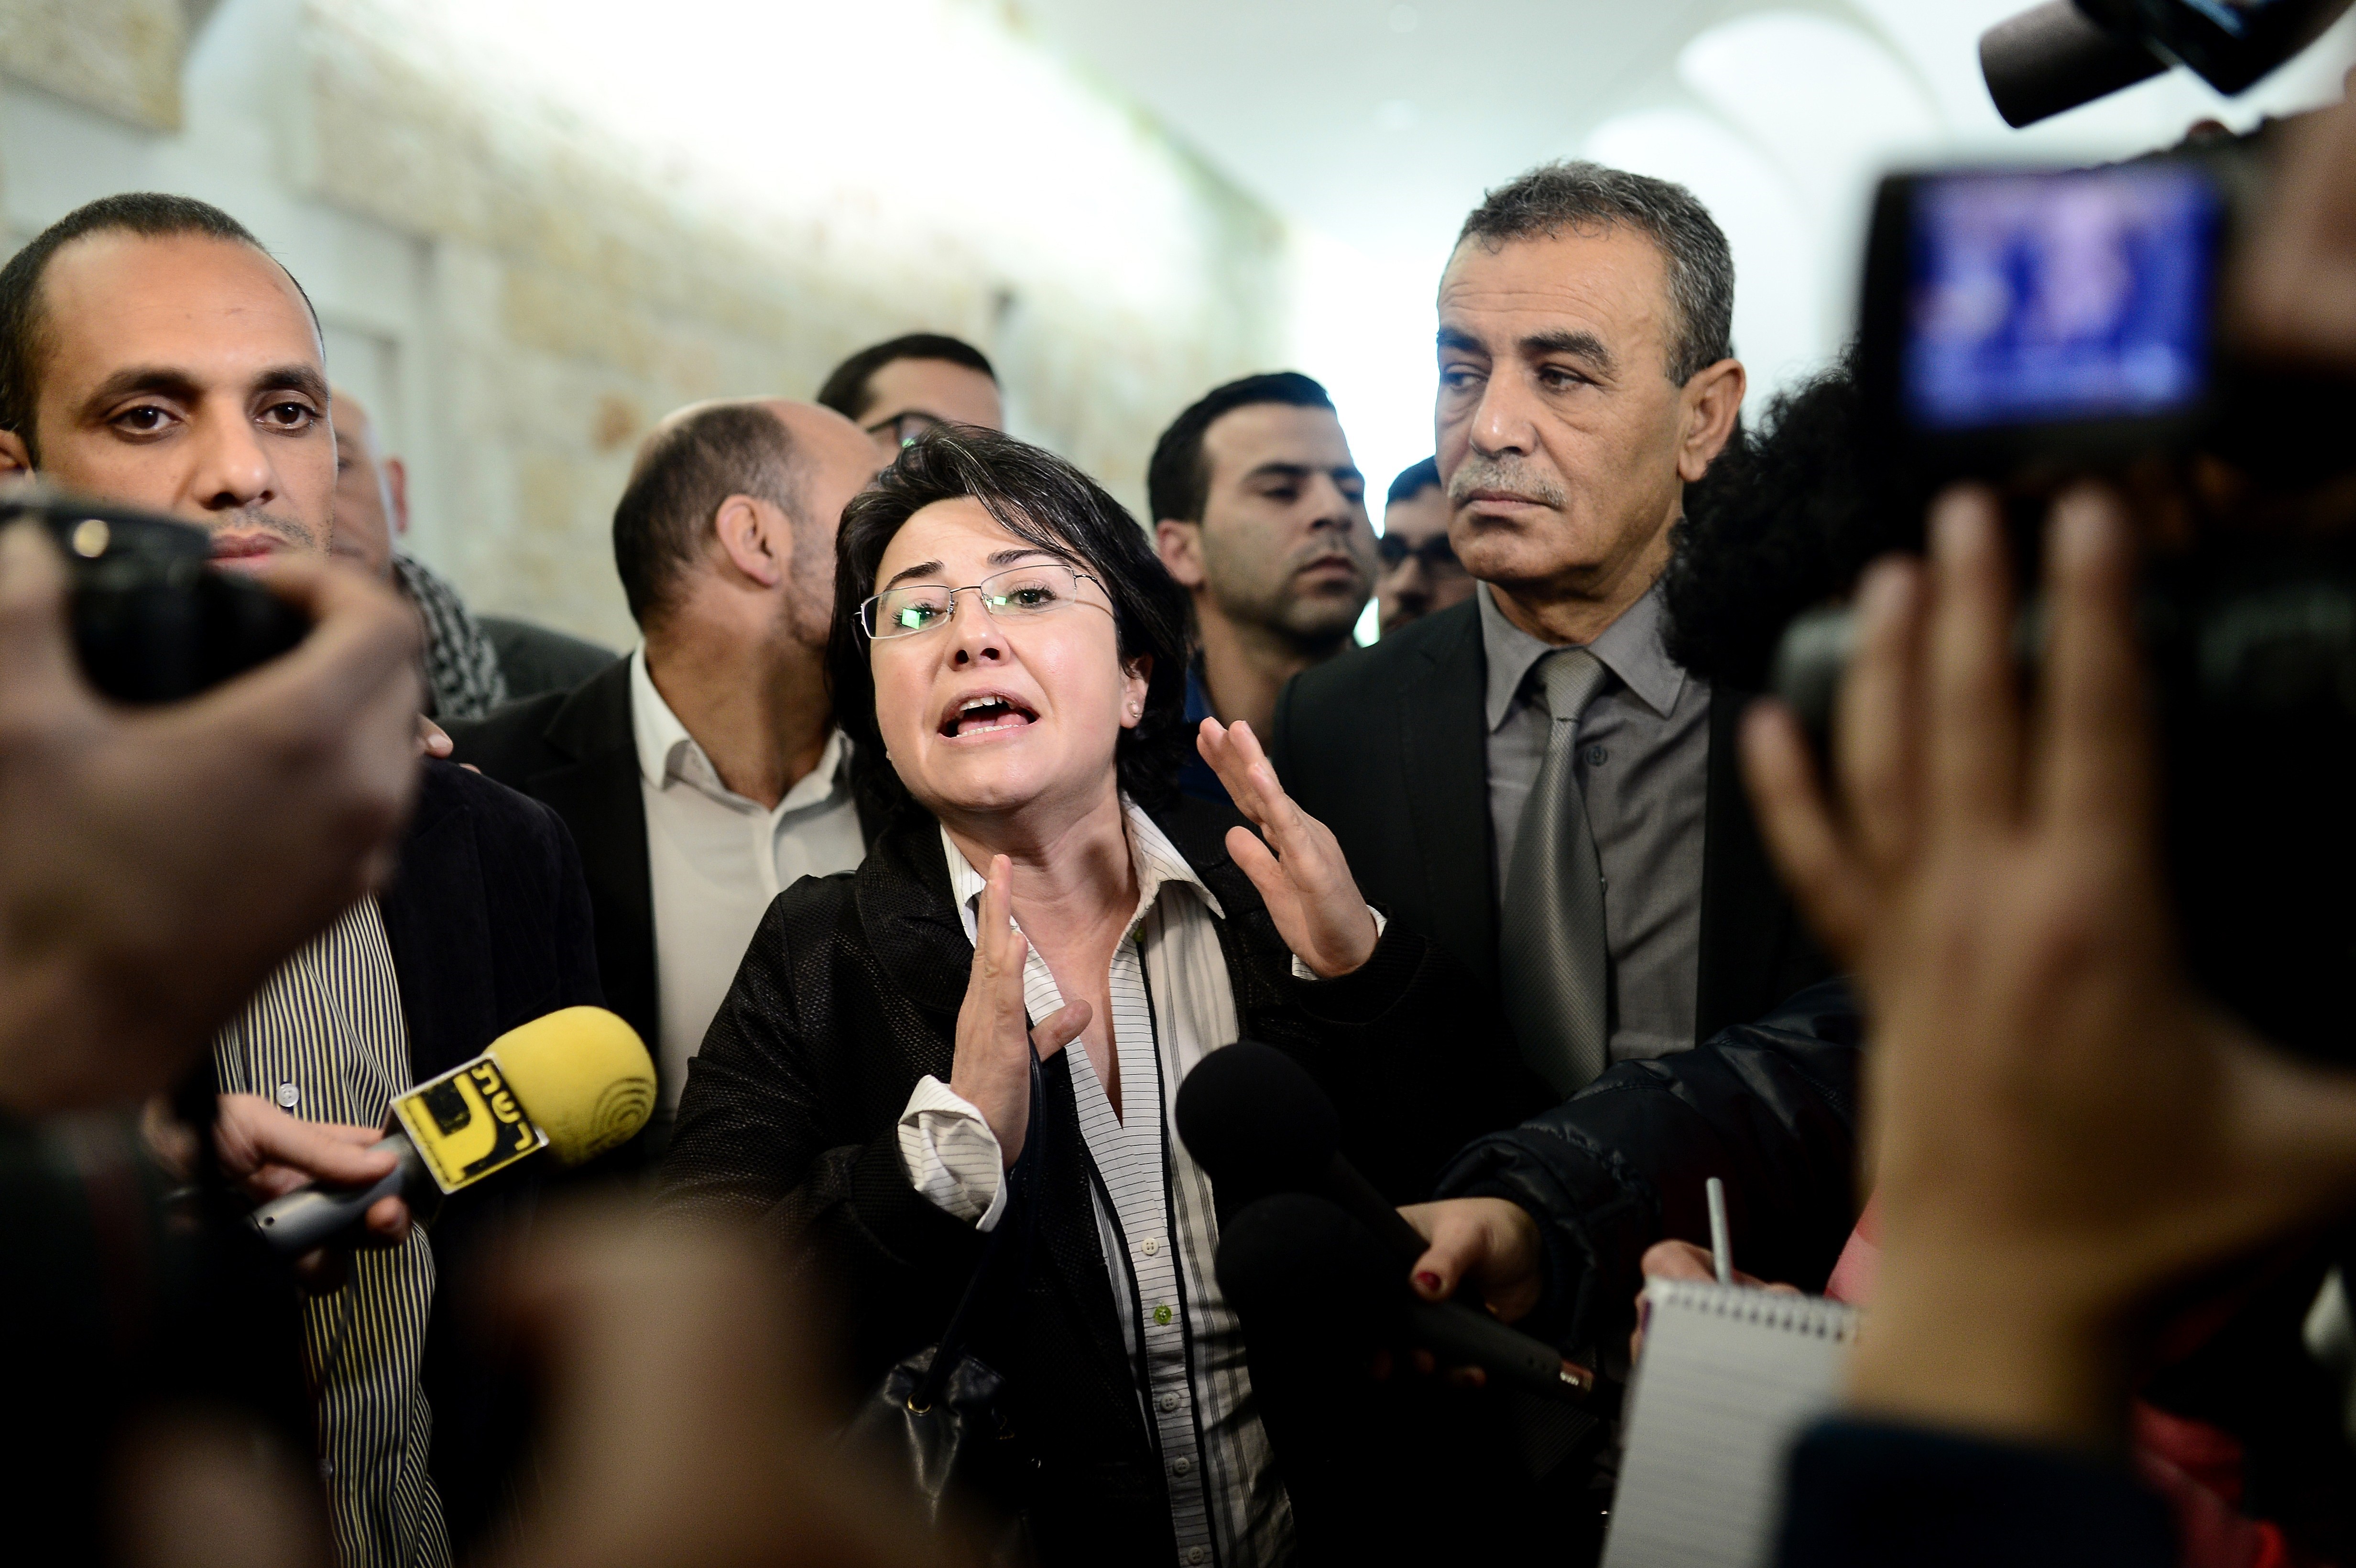 Arab member of Israel's Knesset Haneen Zoabi (C) speaks to the press after the court decision about Israels ban of Arab lawmaker Zoabi from election in Jerusalem on February 14, 2015.